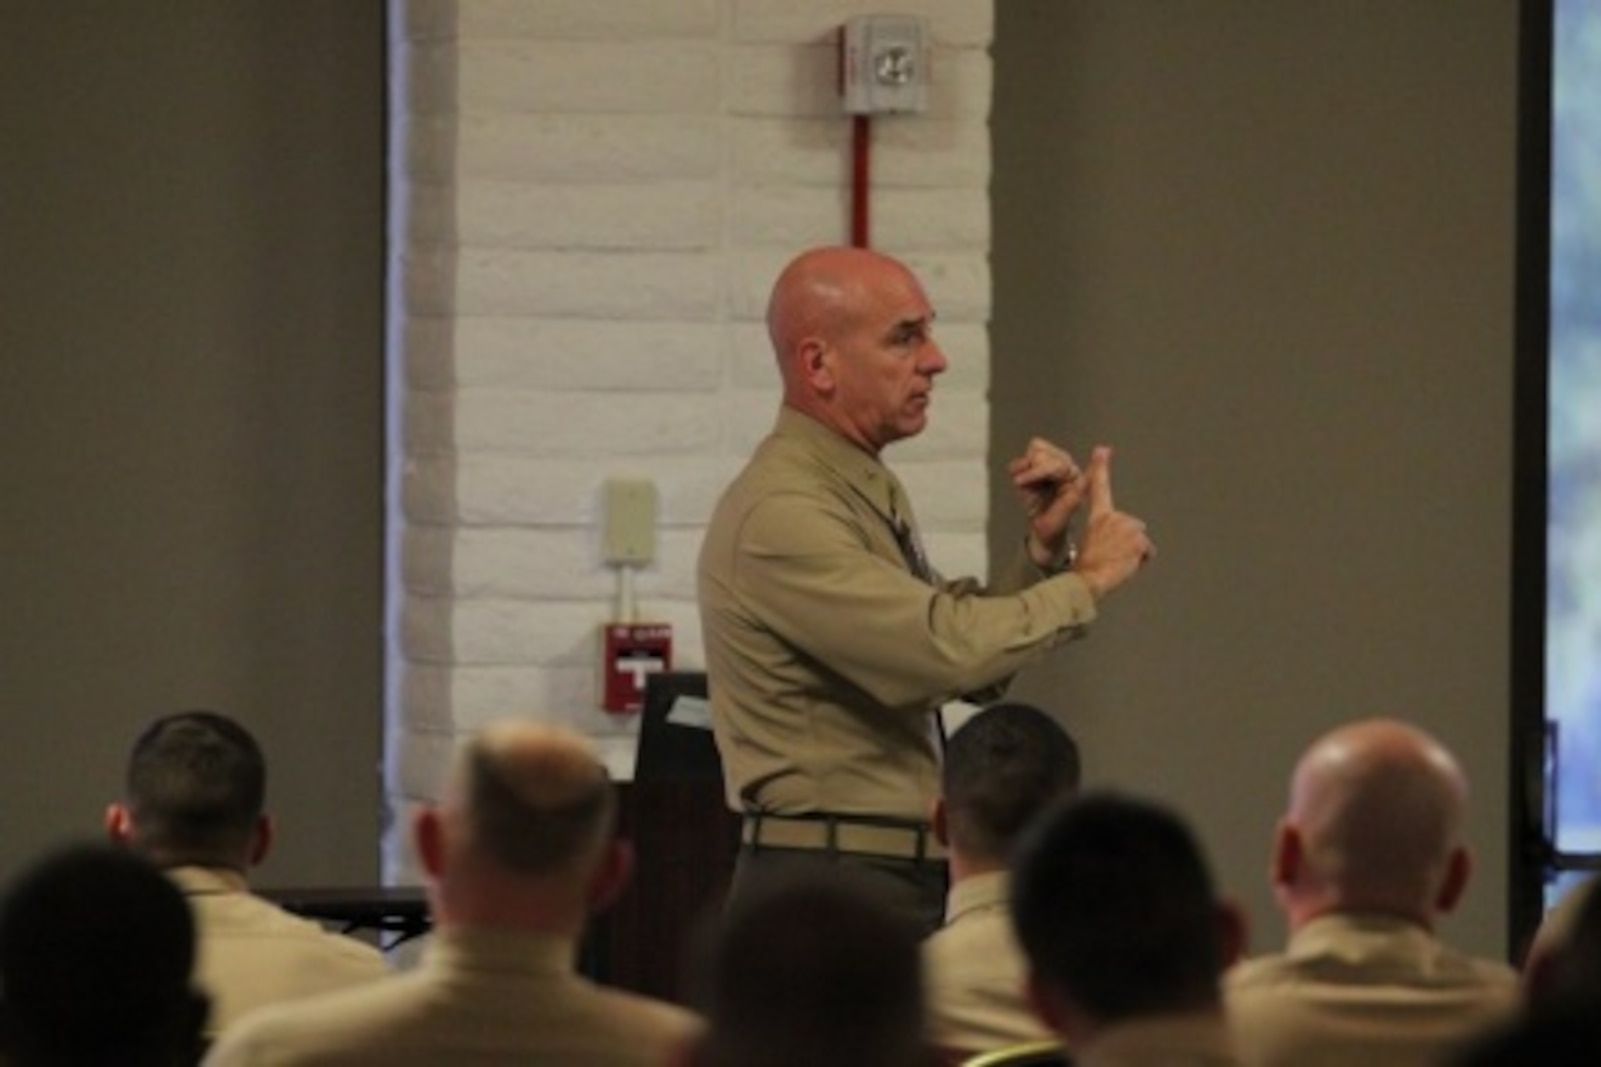 Brig. Gen. David A. Ottignon, the 1st Marine Logistics Group Commanding General, spoke at the Staff Sergeant's Seminar aboard Marine Corps Base Camp Pendleton Friday, Nov. 20. Newly selected and promoted staff sergeants gathered at this seminar to gain insight on expectations of a staff NCO from the senior enlisted and officers' perspective.